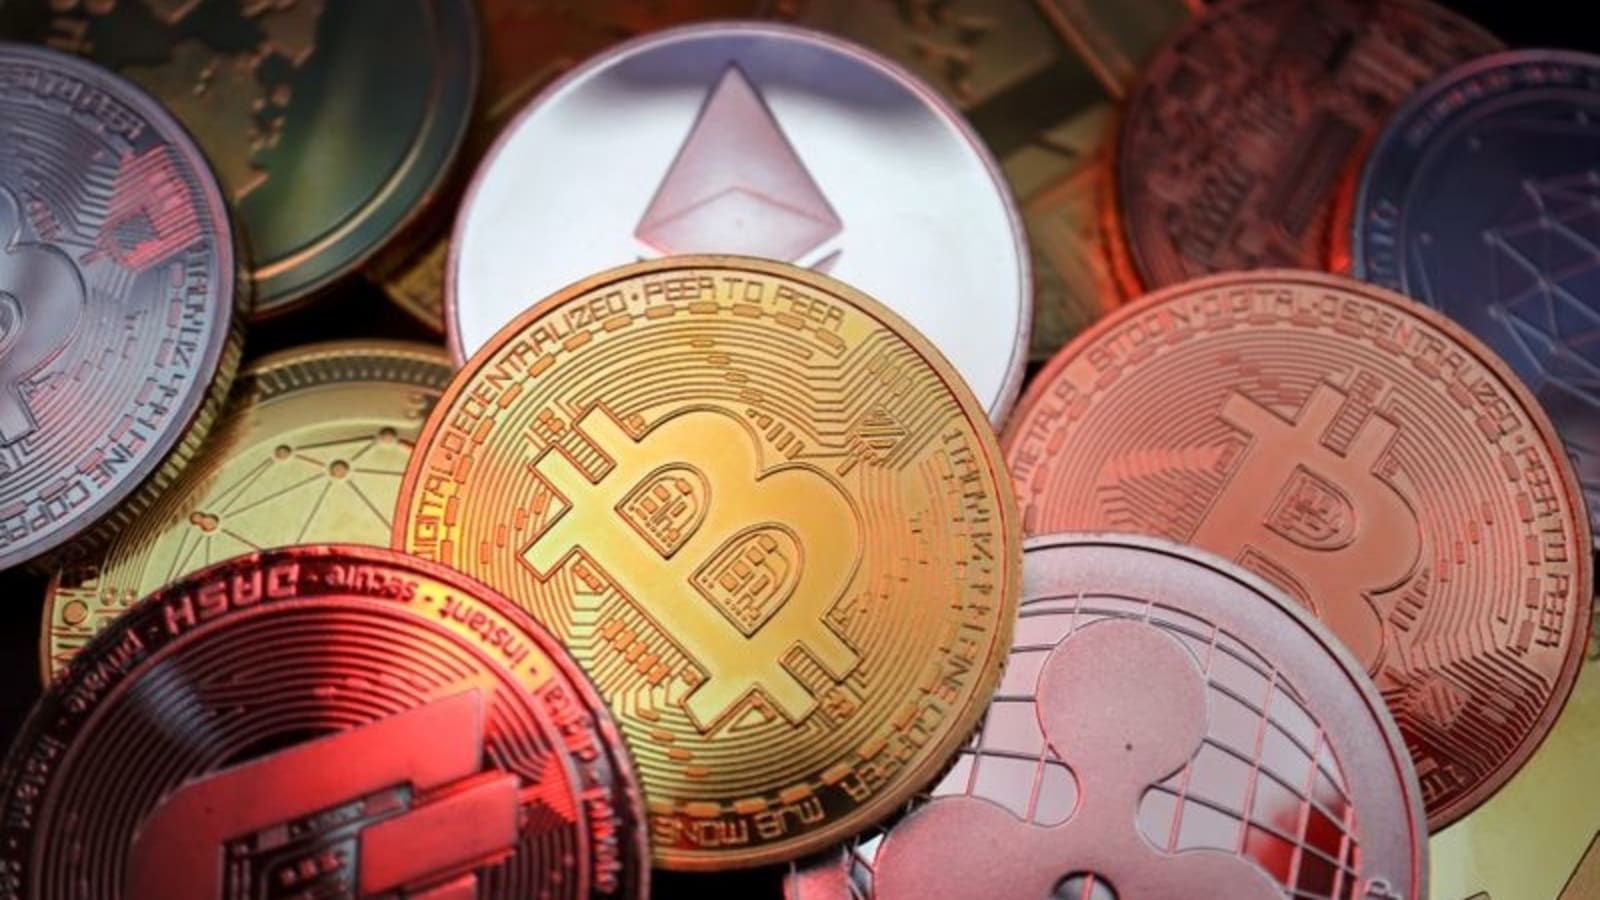 Bitcoin price: Latest news, trends and updates on cryptocurrency